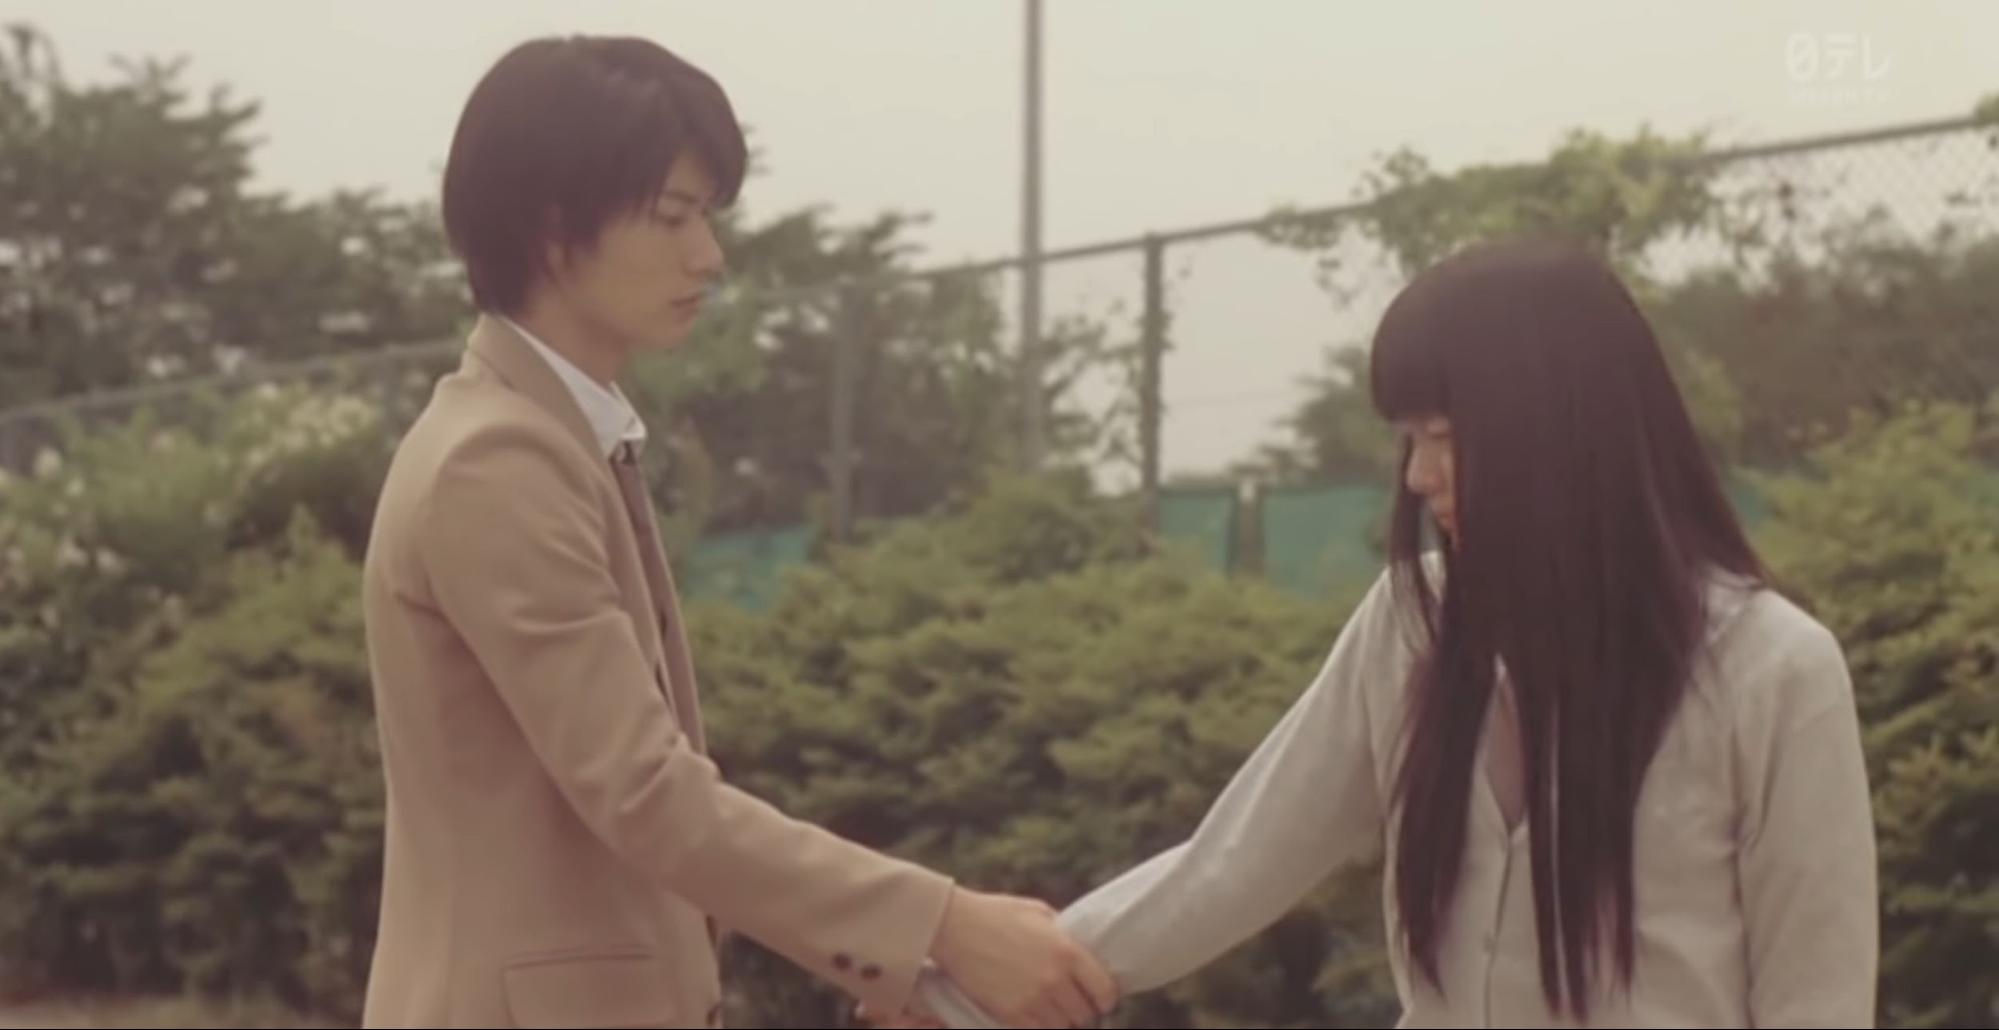 Japanese high school romance movies - From Me To You